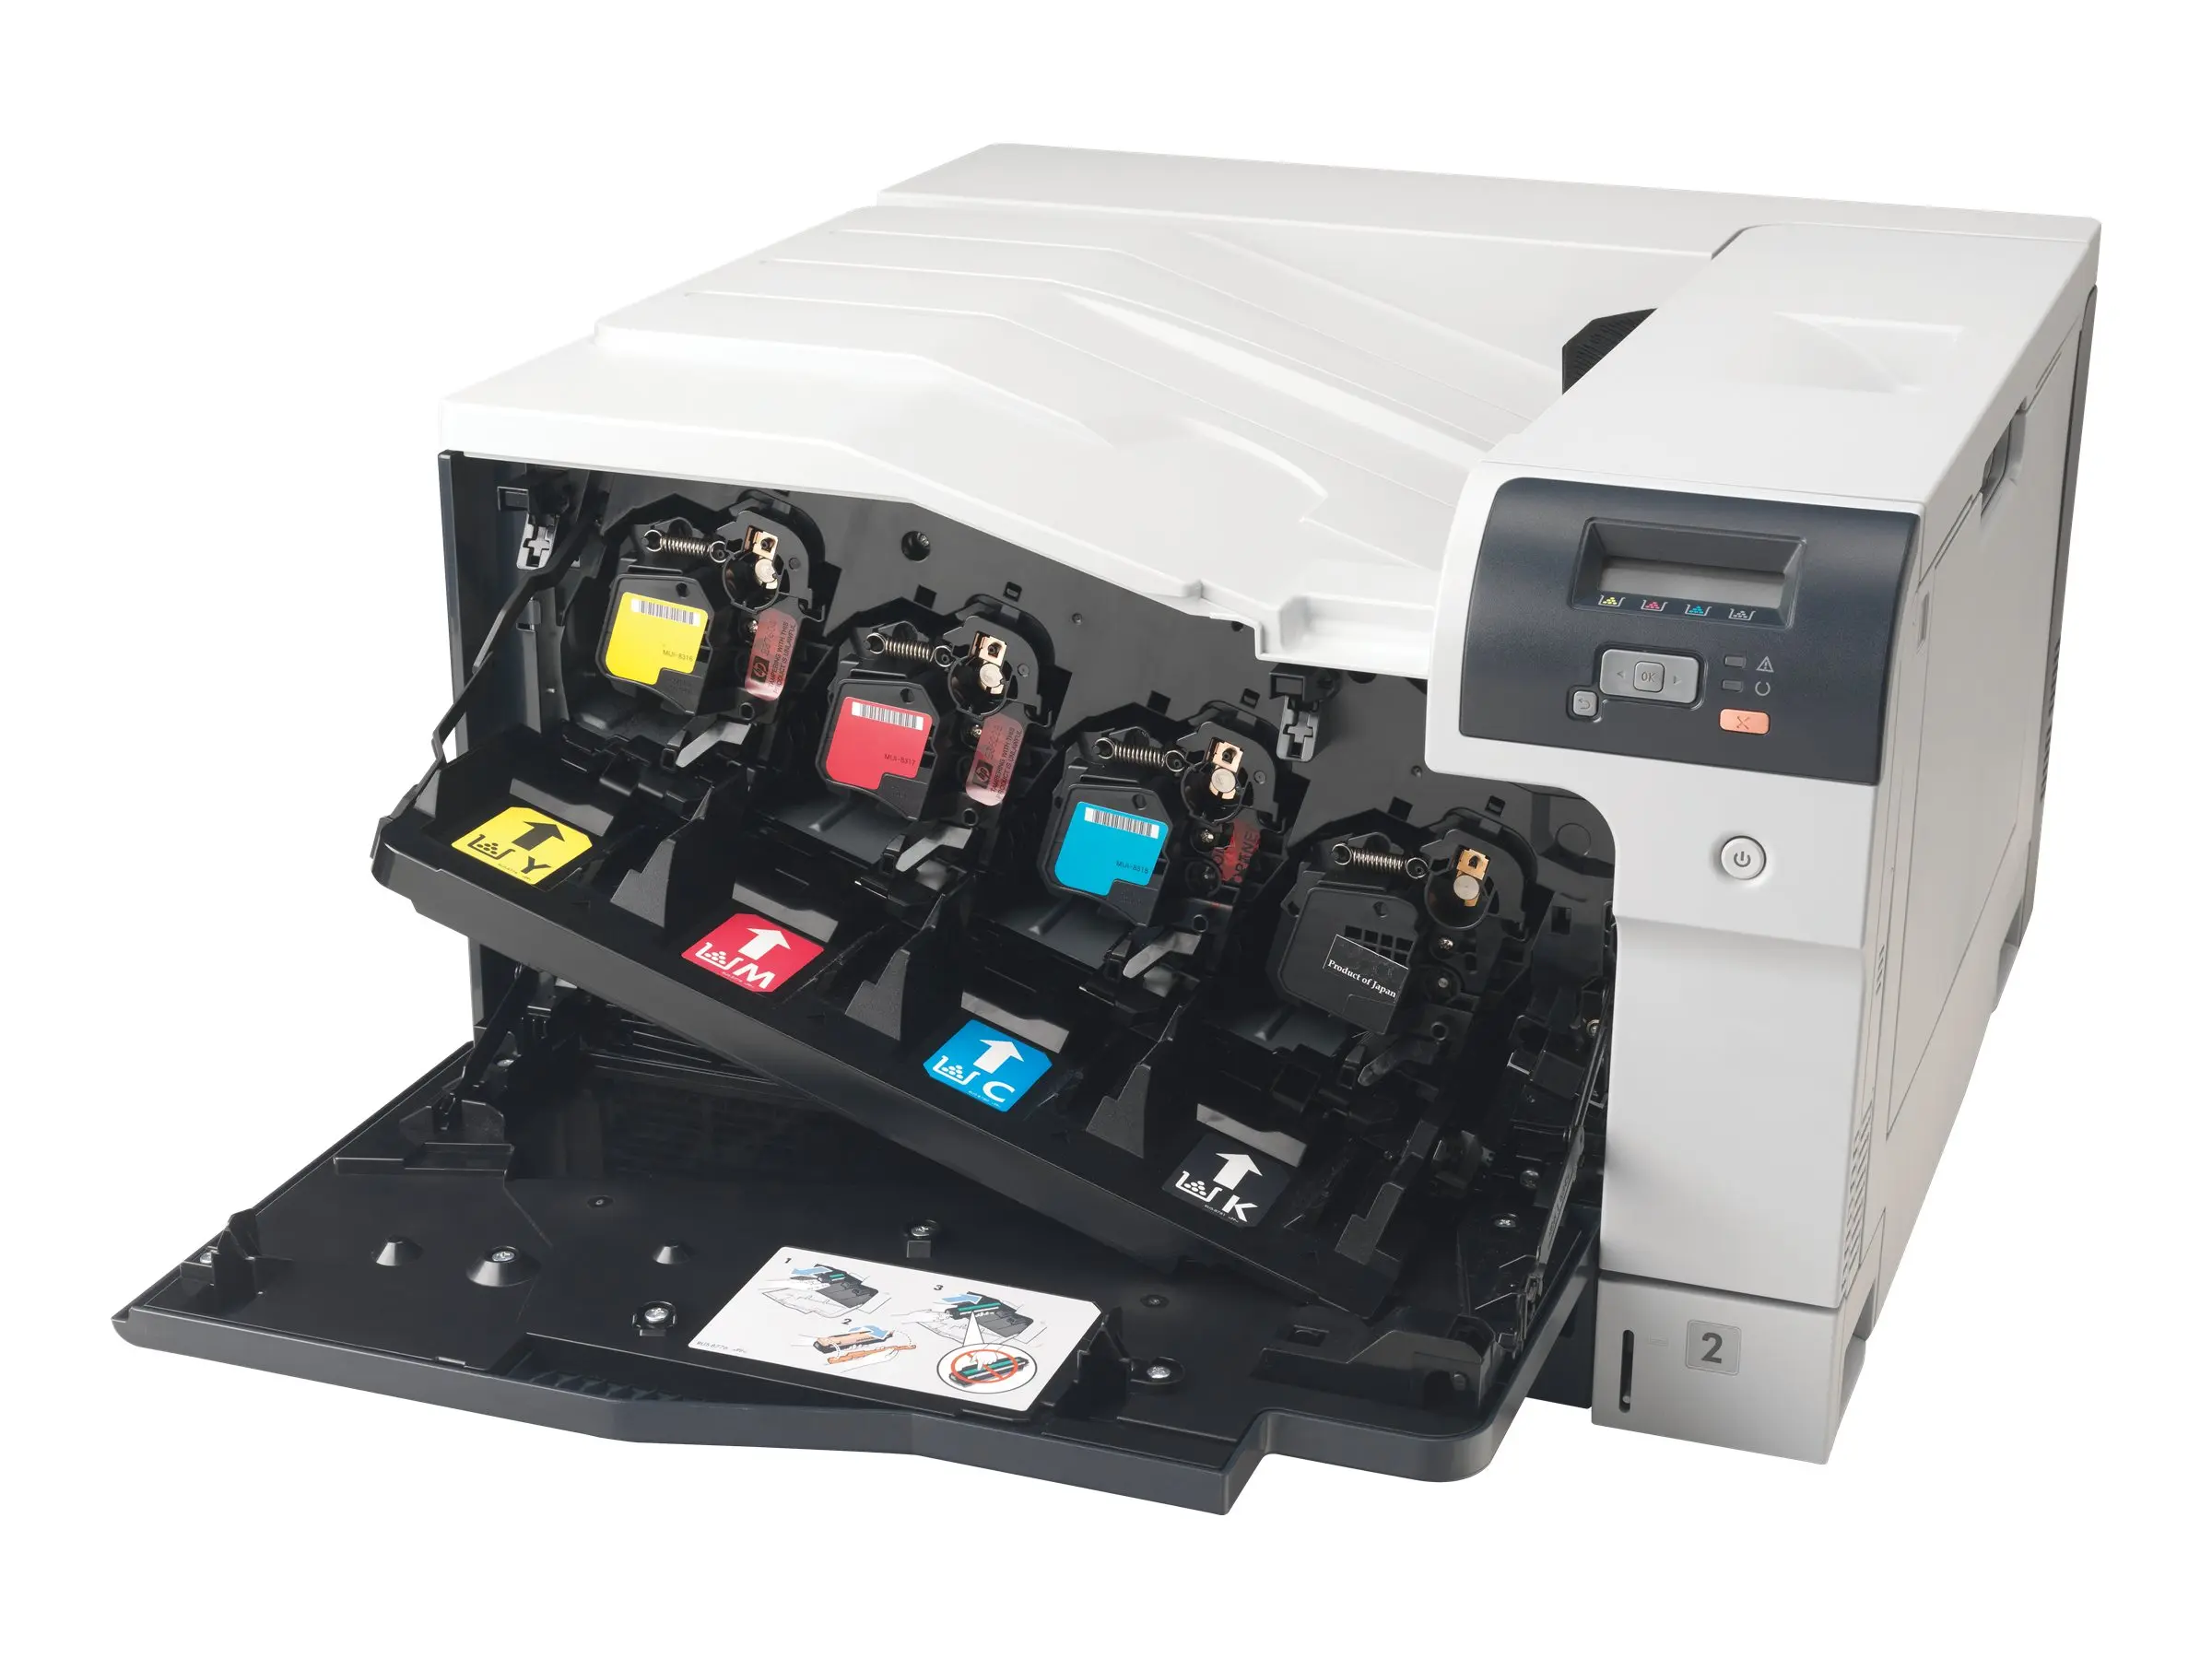 hewlett packard color laserjet cp5225dn - What is the price of HP Color LaserJet Professional CP5225dn printer in Pakistan